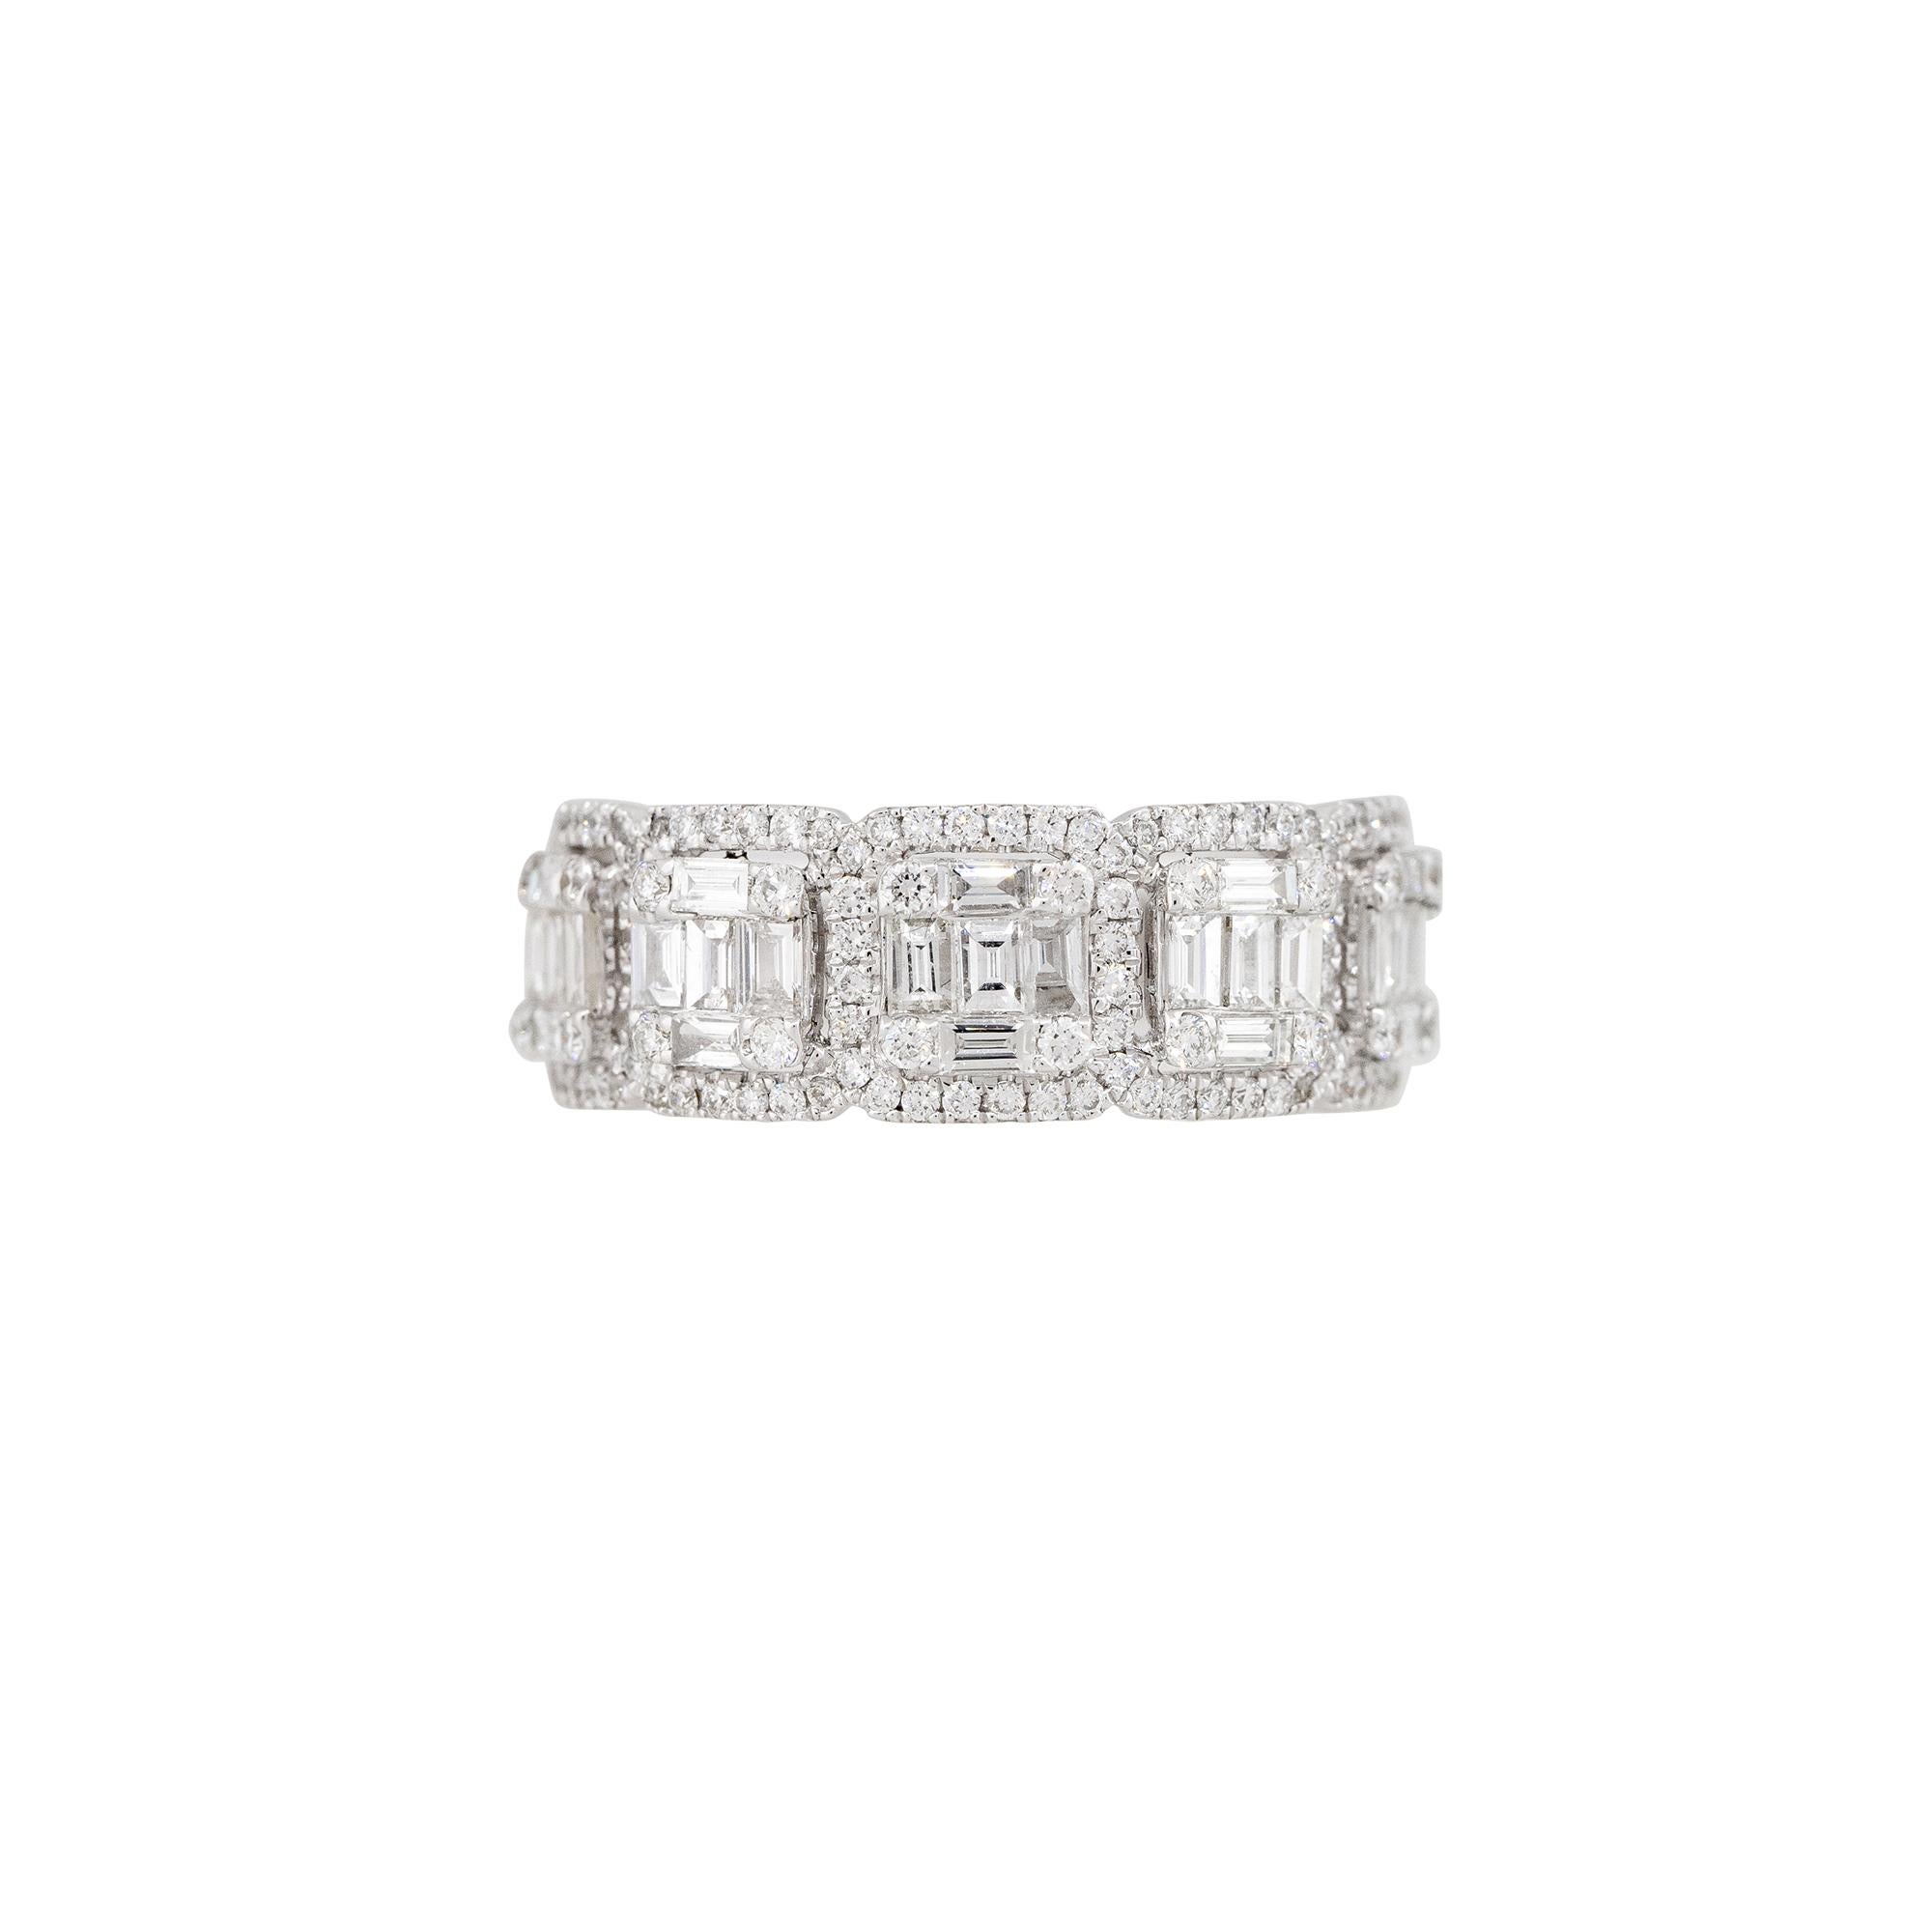 18k White Gold 1.39ctw Mosaic Diamond 5 Station Ring

Product: 5-Station Mosaic Diamond Band
Material: 18k White Gold
Diamond Details: There are approximately 0.88 carats of Baguette cut diamonds (25 stones) and approximately 0.51 carats of Round